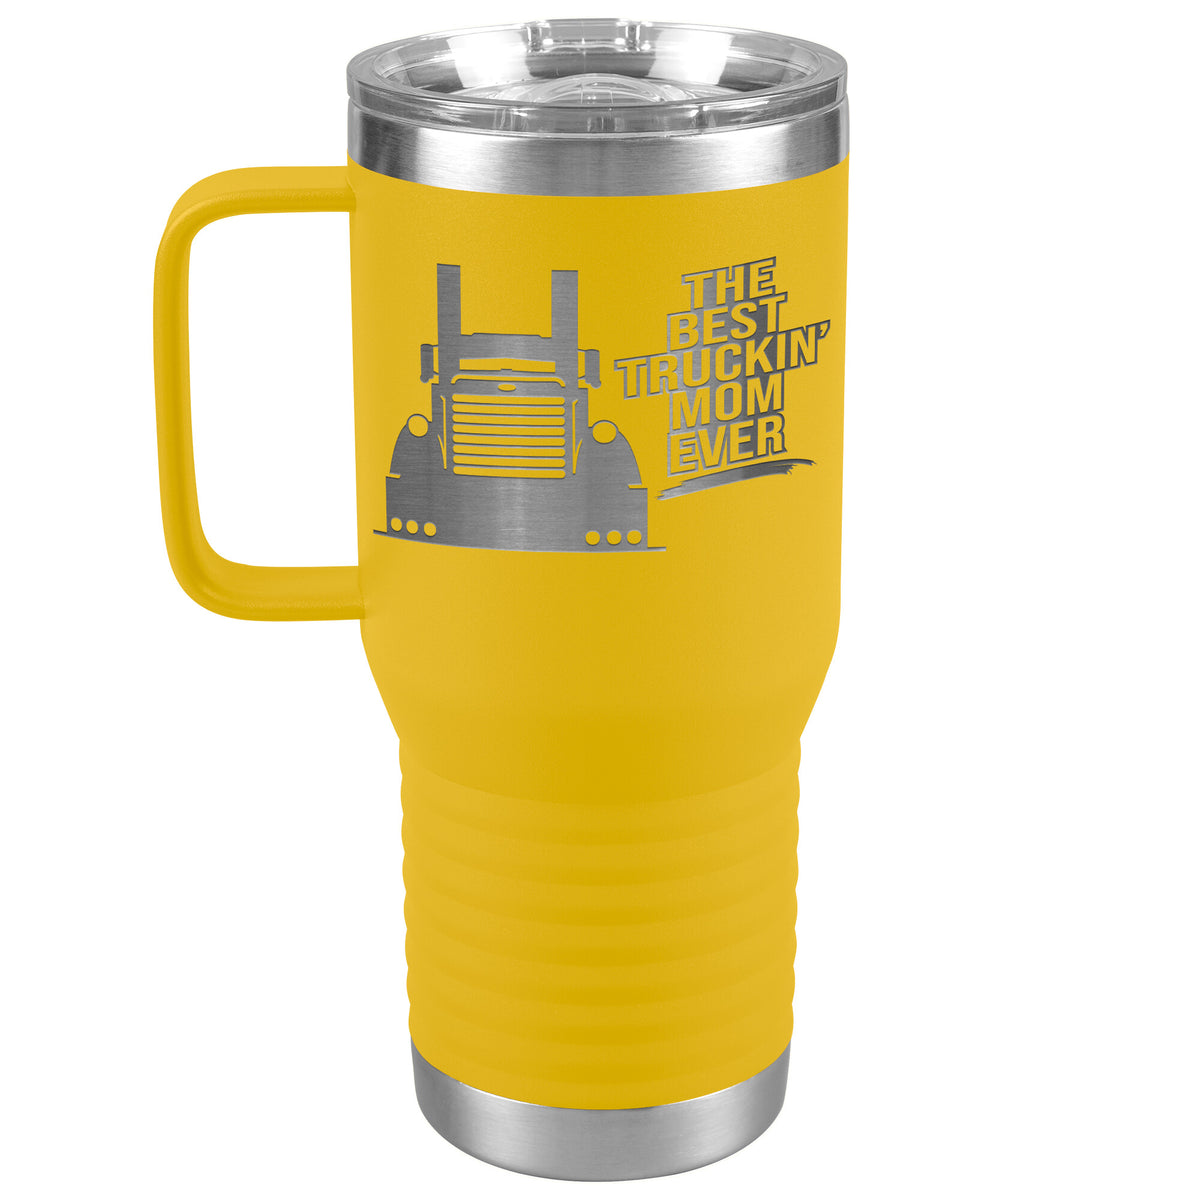 The Best Truckin' Mom Ever - 20oz Handle Tumbler - Pete 379 - Free Shipping